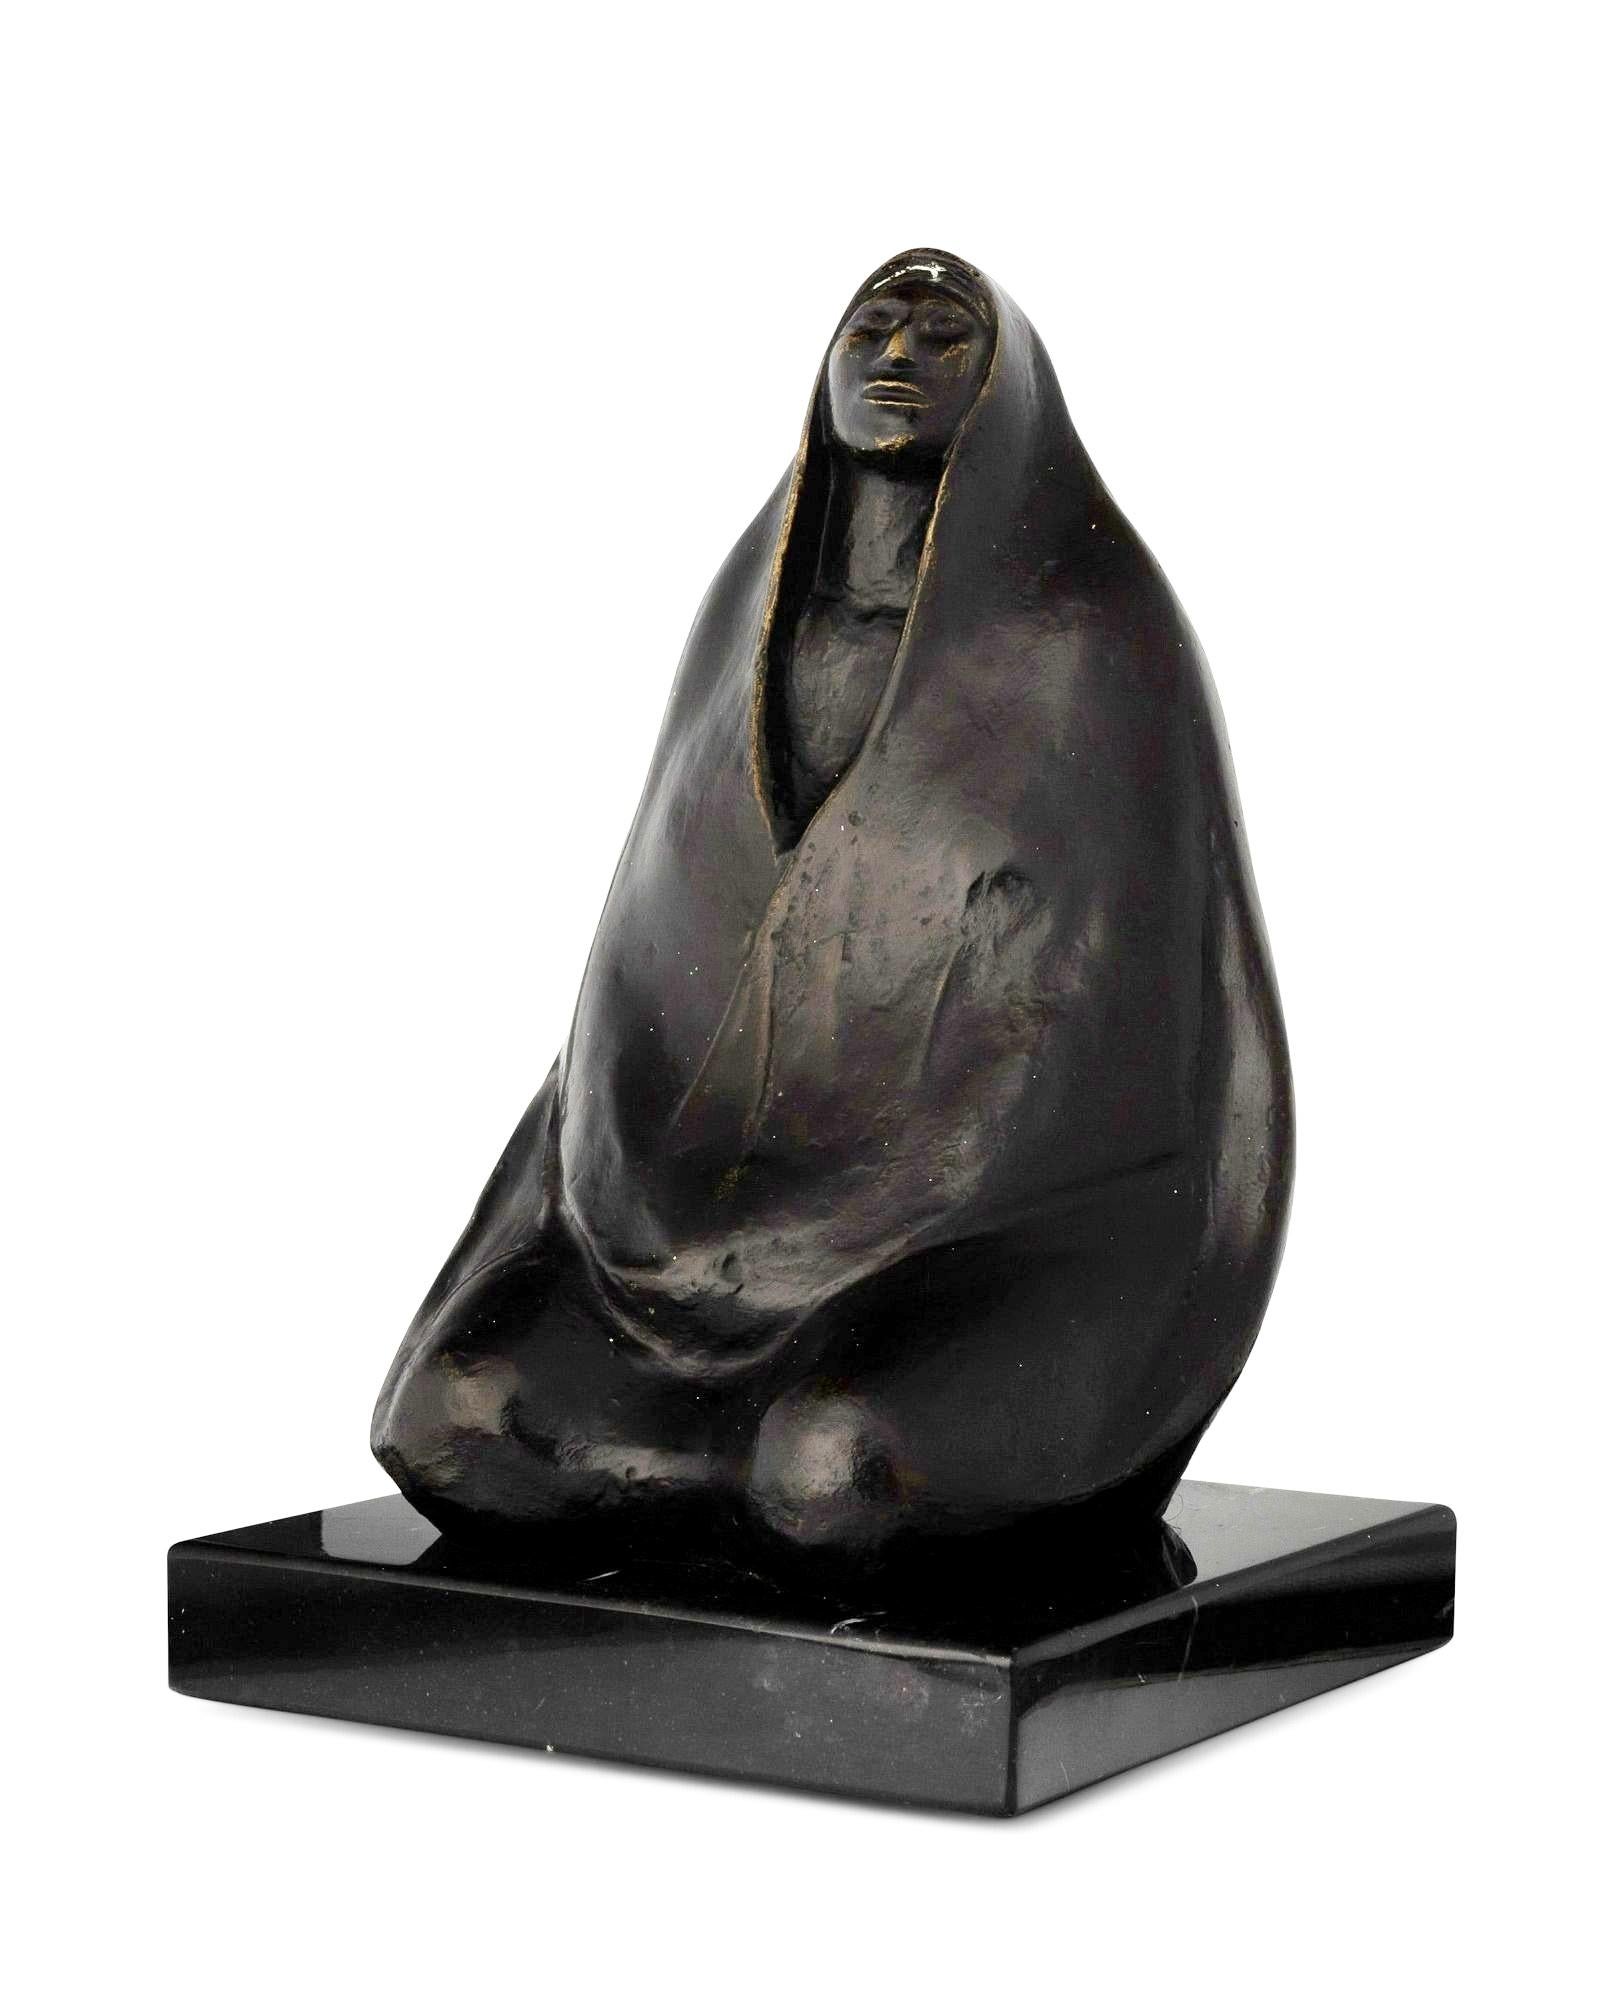 Introducing an exquisite Bronze Sculpture by renowned Mexican artist, Jorge Luis Cuevas, hailing from Mexico in 1922. This remarkable piece showcases the artist's unique style and mastery of sculpting, making it a true collector's treasure. This